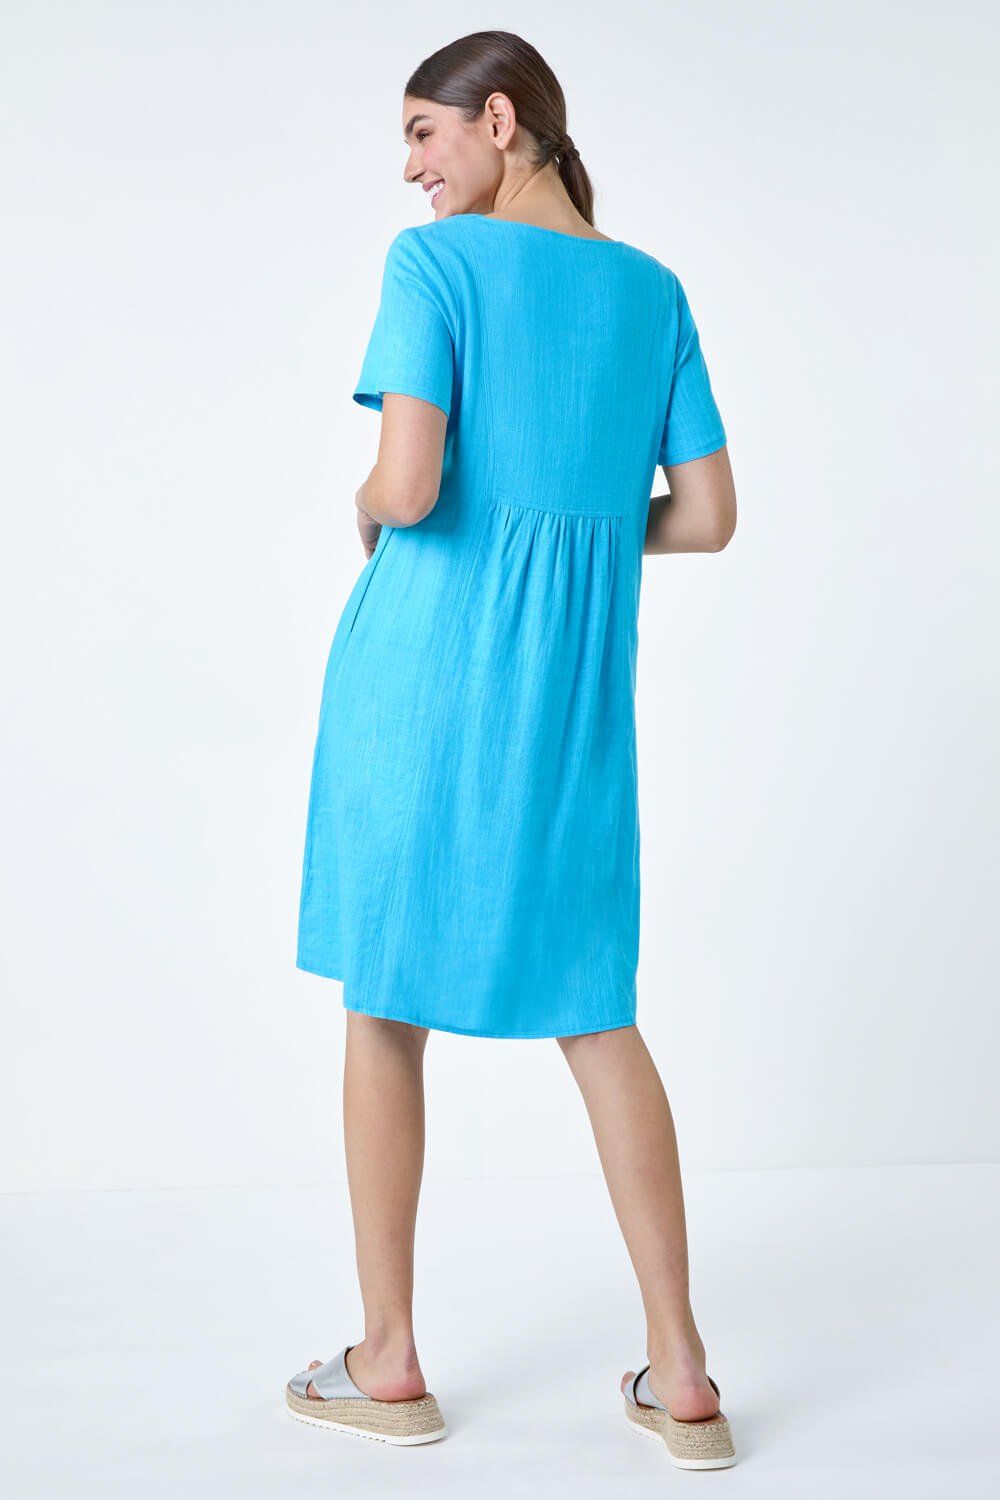 Turquoise Relaxed Pocket Dress, Image 3 of 5